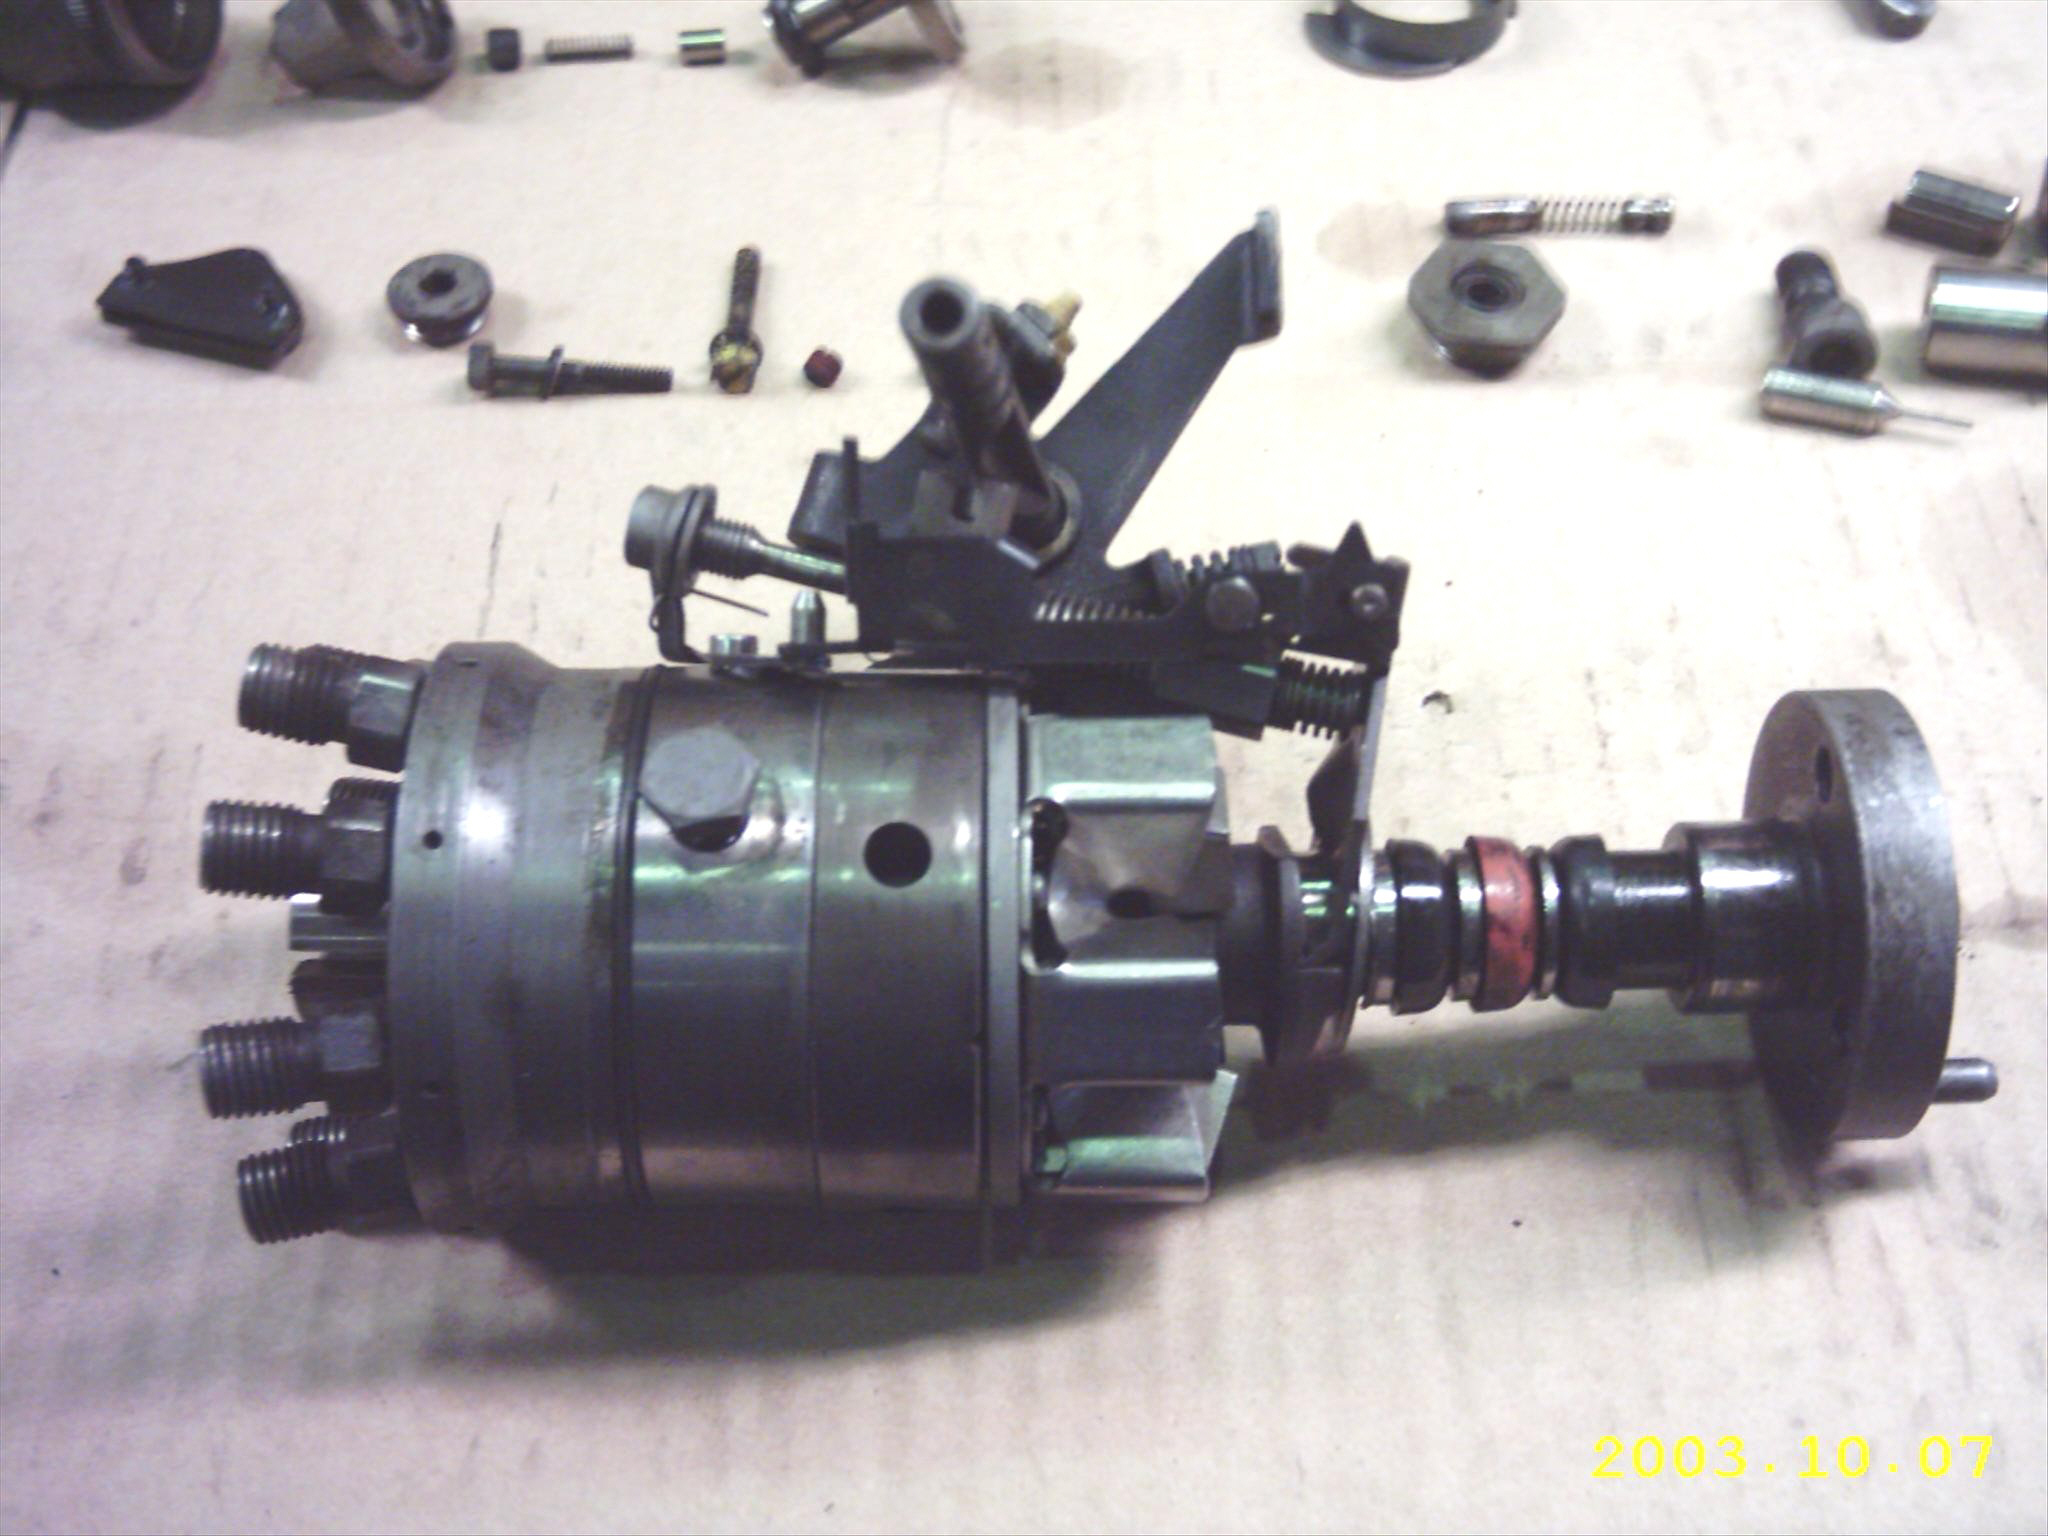 Hydraulic head with throttle linkage attached (at top) and drive shaft engage (right)